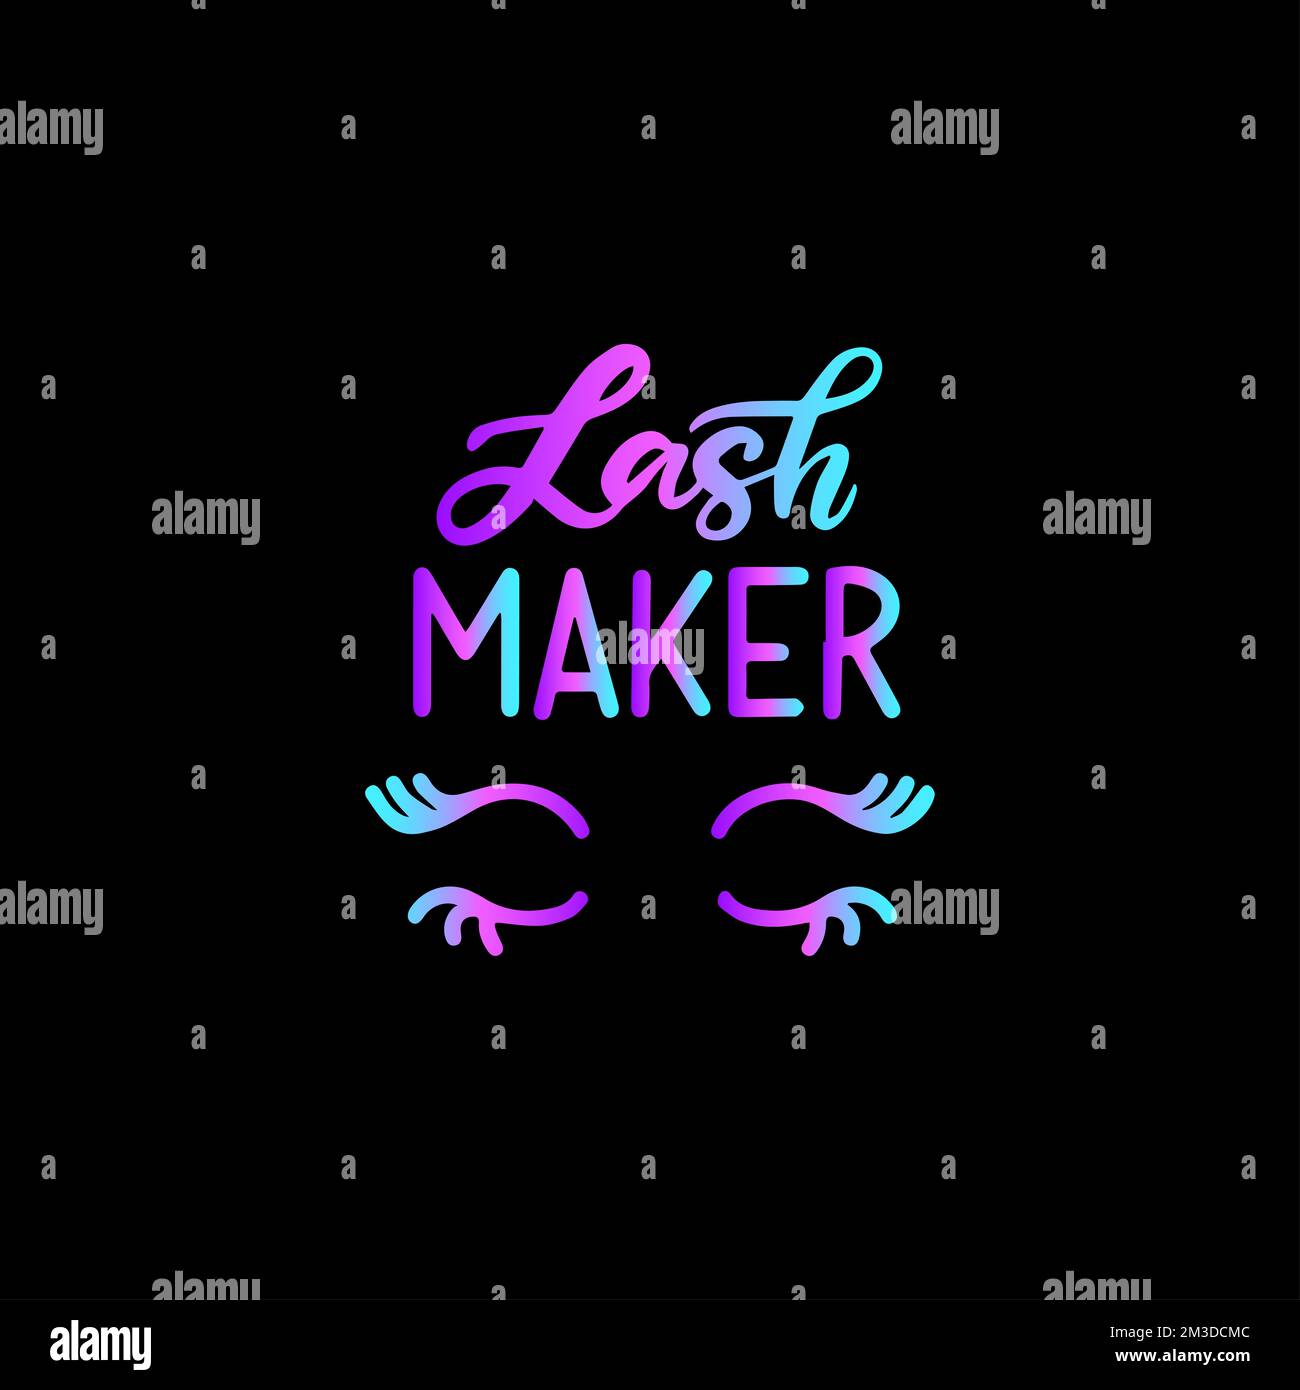 Lash maker beautiful and colorful text design and black background-01 Stock Photo